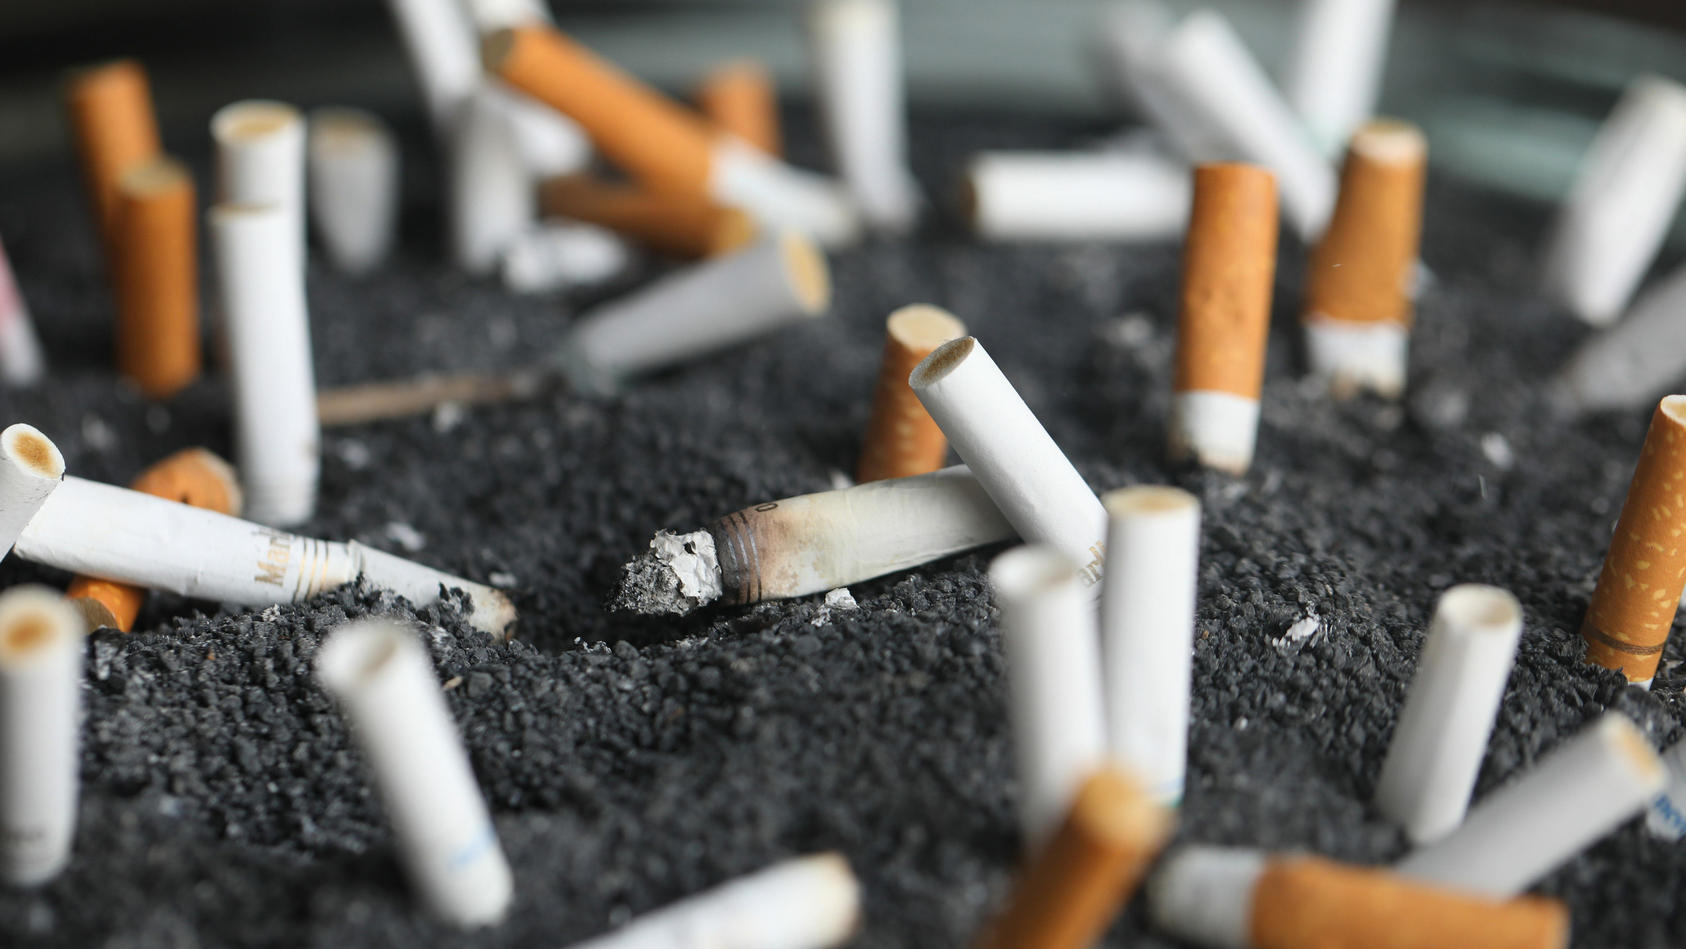 FILE - Cigarette butts sit in an ashtray on March 28, 2019, in New York. The highest court in Massachusetts has upheld a nearly $37 million judgment for a woman Tuesday, May 9, 2023, who said she developed cancer after switching to Marlboro Light cig